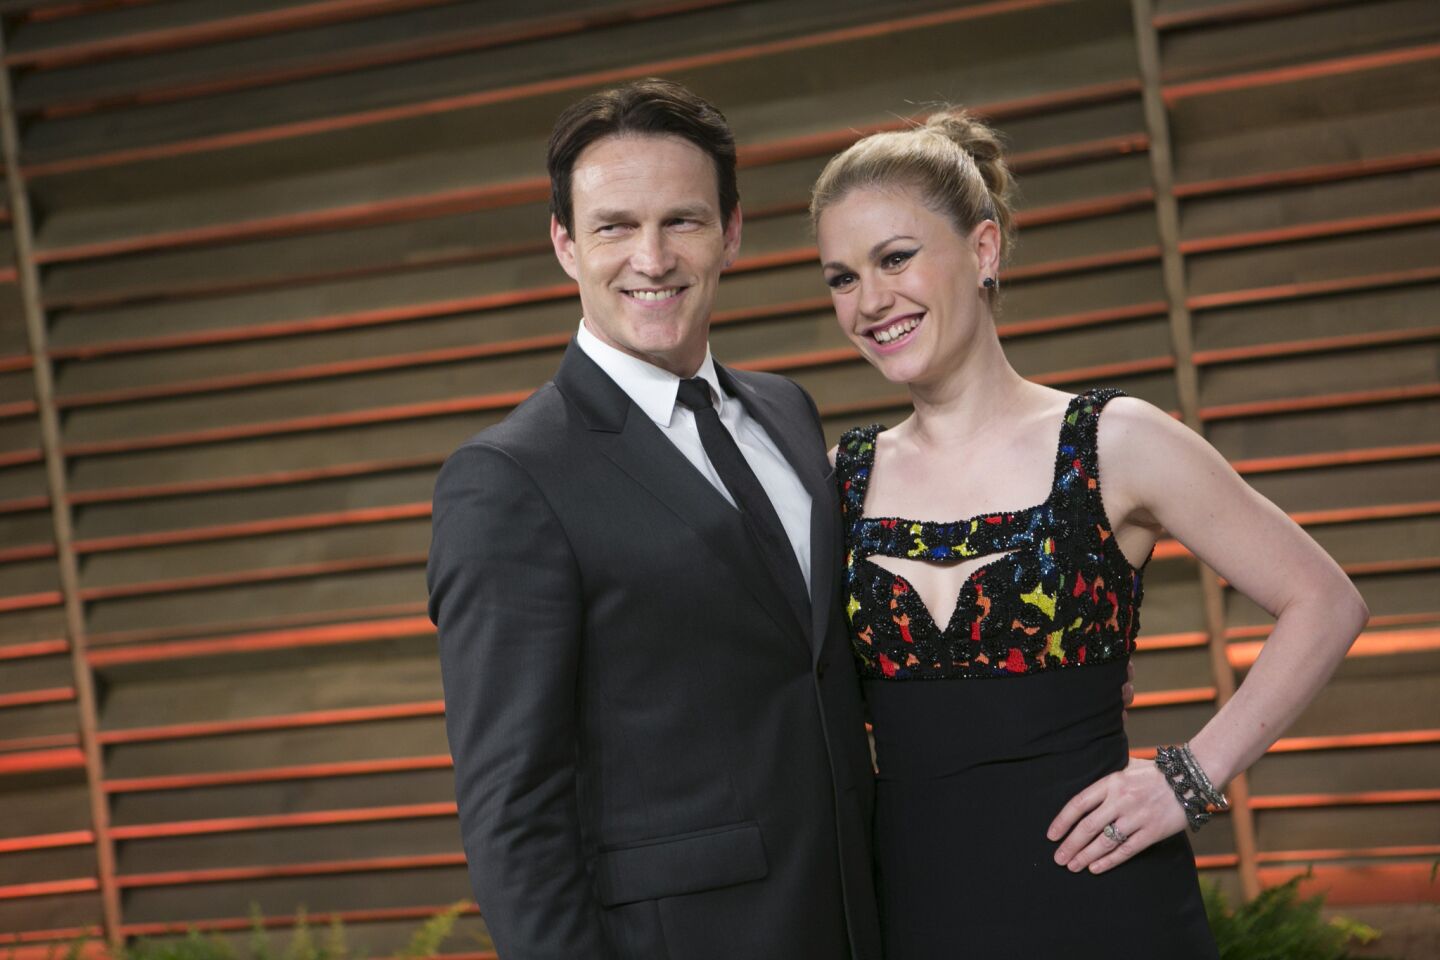 There's room in this town for more than one vampire baby, Edward and Bella. Anna Paquin and Stephen Moyer have welcomed twins. The married "True Blood" stars weren't saying exactly when the double bundles arrived, though reps for both said in September 2012 that the kids were premature but doing fine. Moyer and Paquin married in August 2010. She announced her pregnancy in April, with word coming in summer that they'd have two little ones come fall. The newborns are Paquin's first children. Moyer has two kids: 10-year-old Lilac and 12-year-old Billy. MORE: 'True Blood' pair Anna Paquin and Stephen Moyer welcome twins